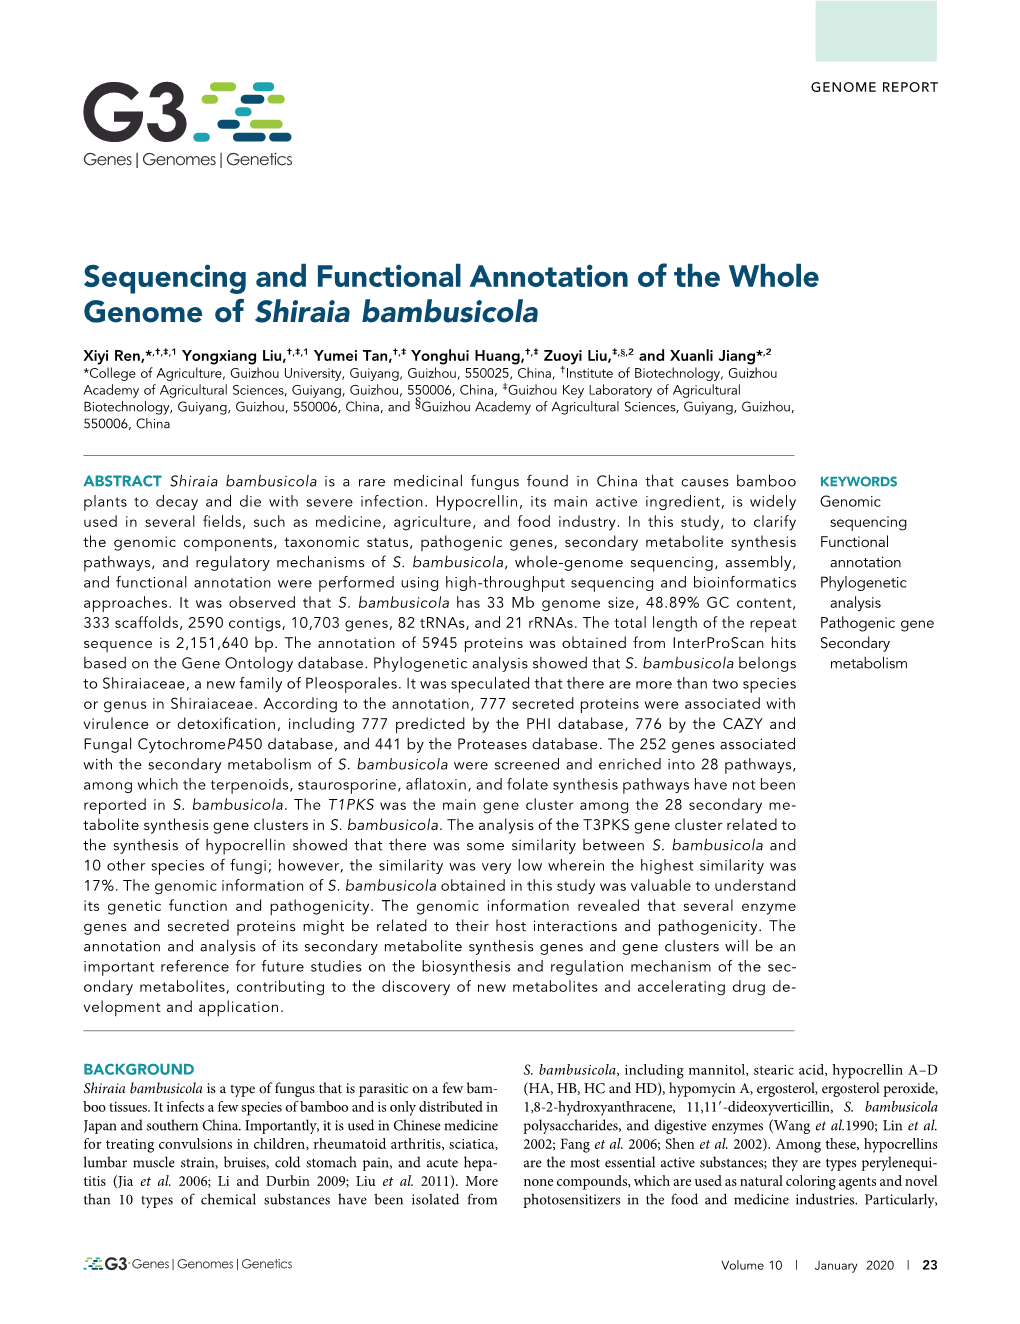 Sequencing and Functional Annotation of the Whole Genome of Shiraia Bambusicola